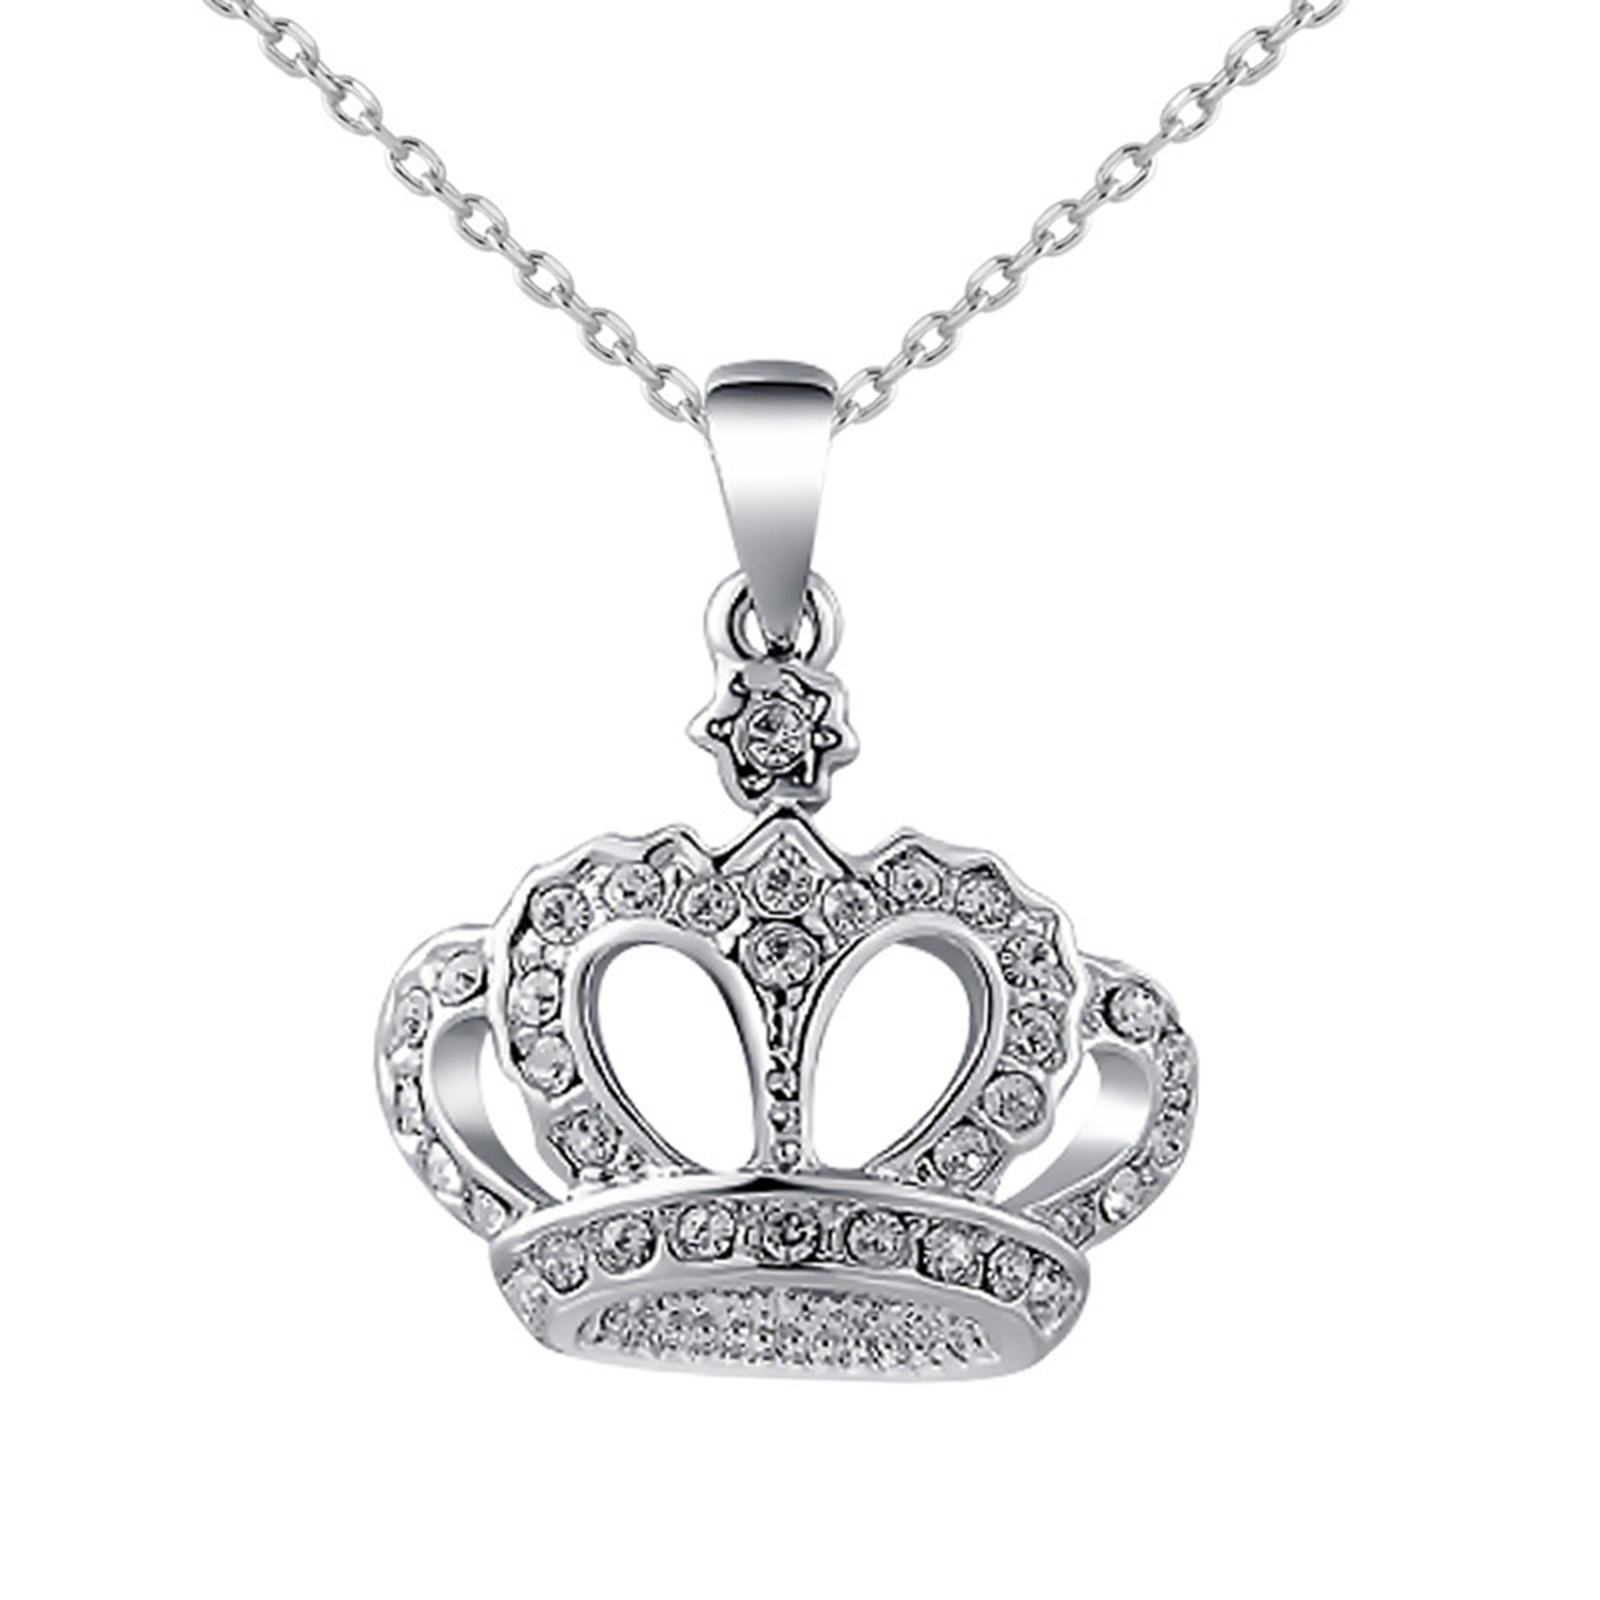 Picture of Zinc Based Alloy Necklace Silver Tone Crown Clear Rhinestone 45cm(17 6/8") long, 1 Piece